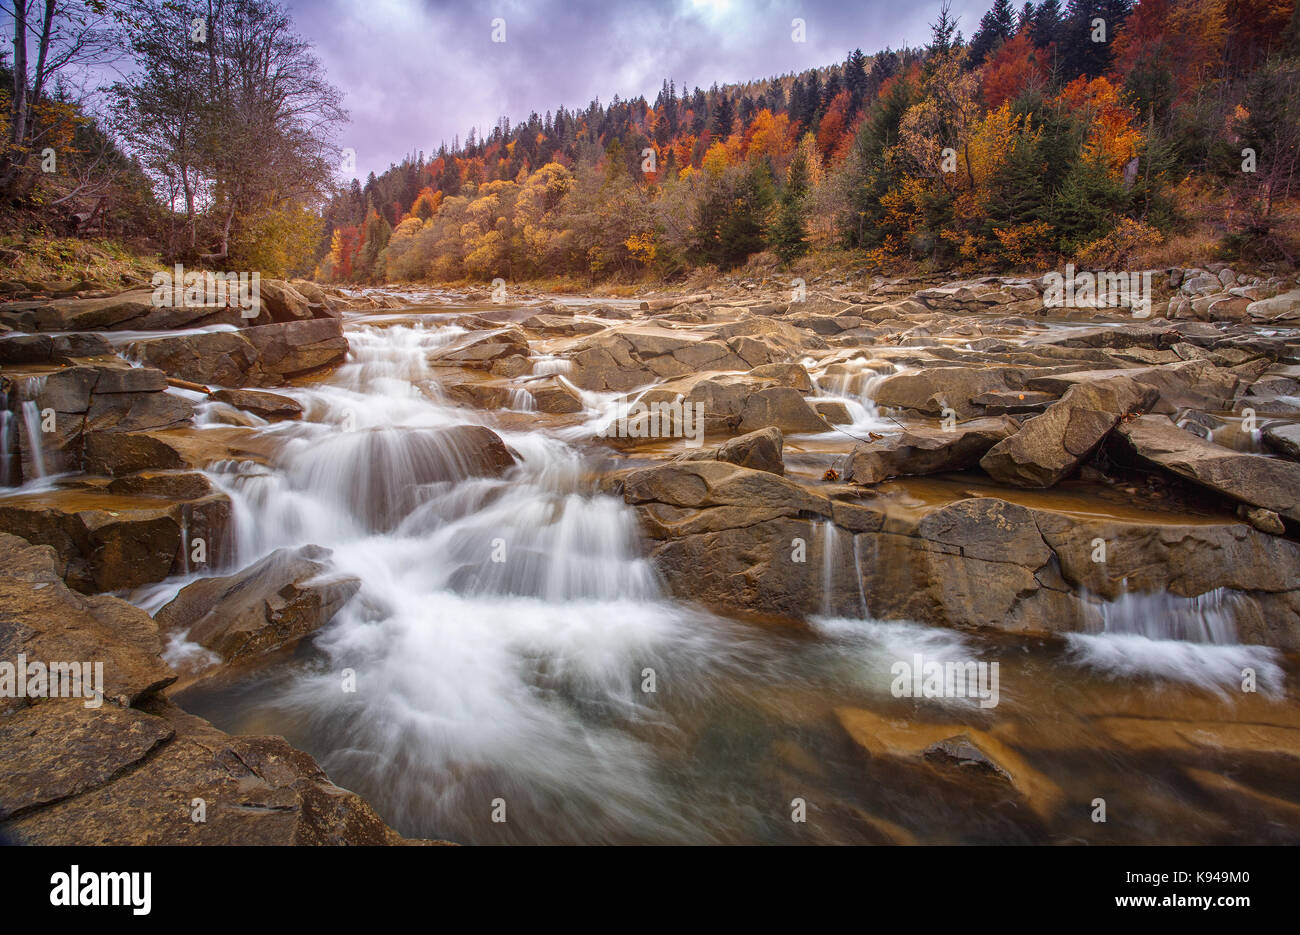 Restless dangerous mountain river with stones. The river in the autumn forest Stock Photo